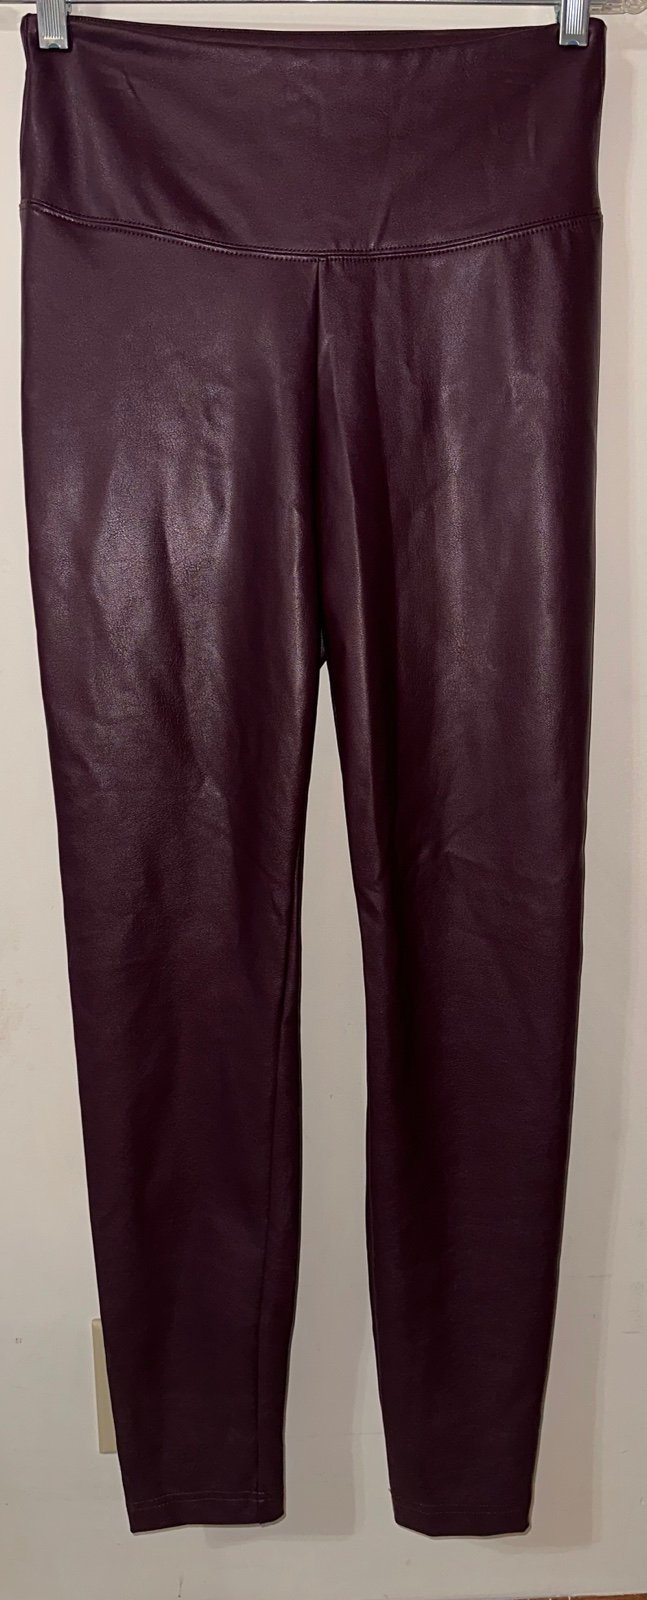 Simple WBHM Faux Leather Runway Leggings size 6R in Cab